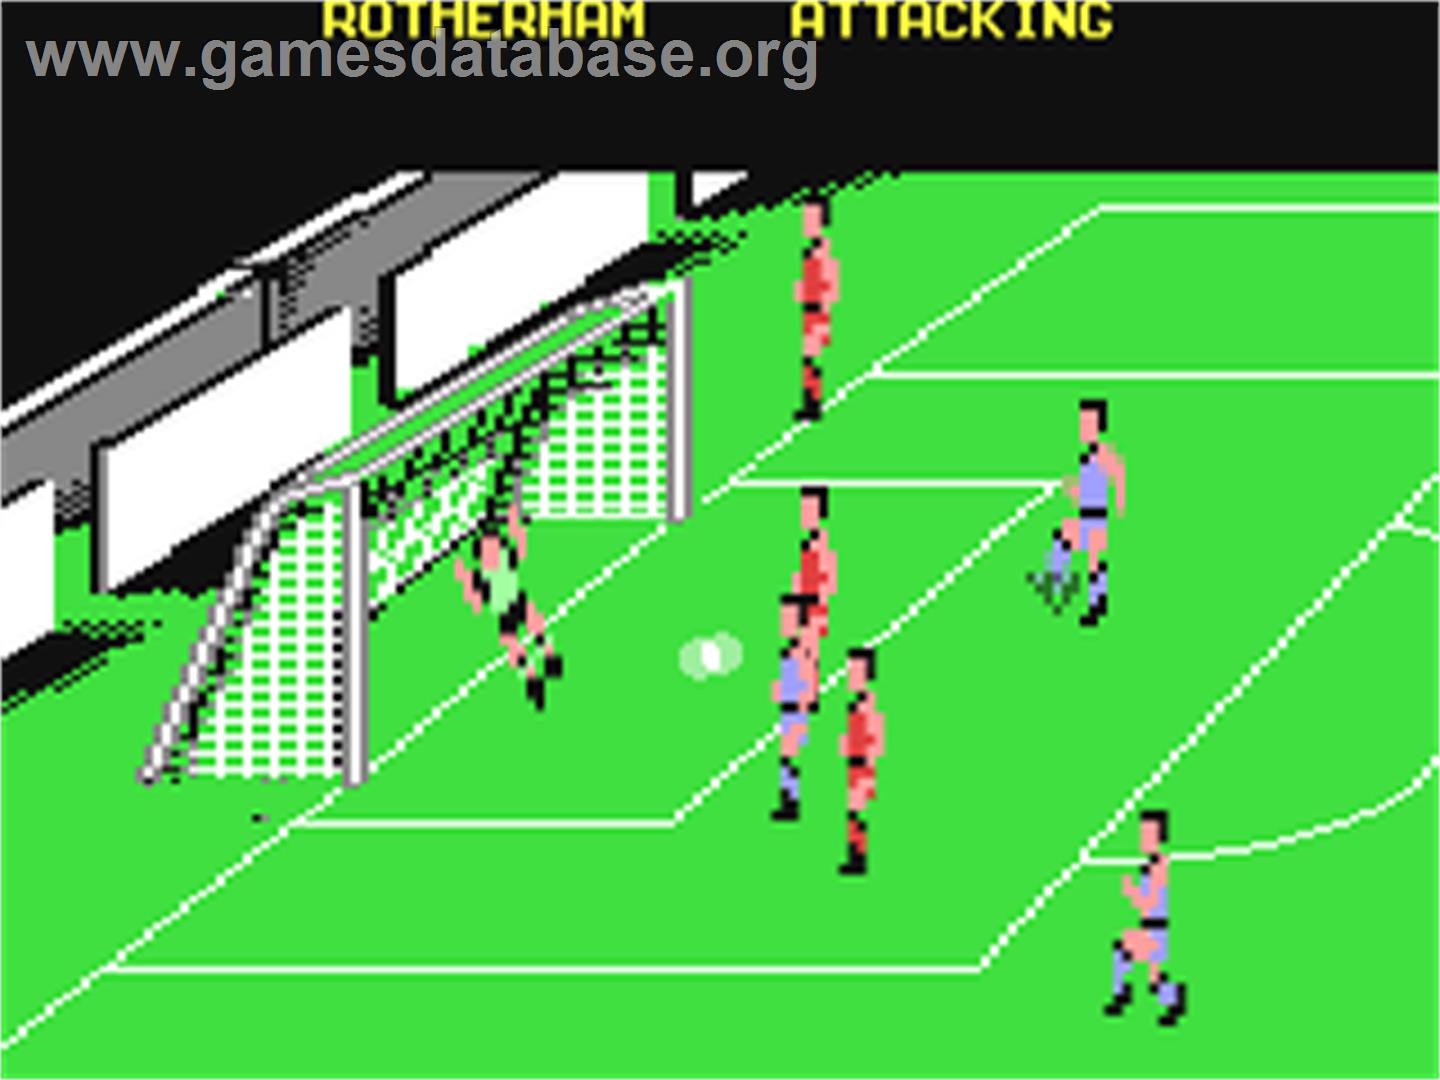 Kenny Dalglish Soccer Manager - Commodore 64 - Artwork - In Game